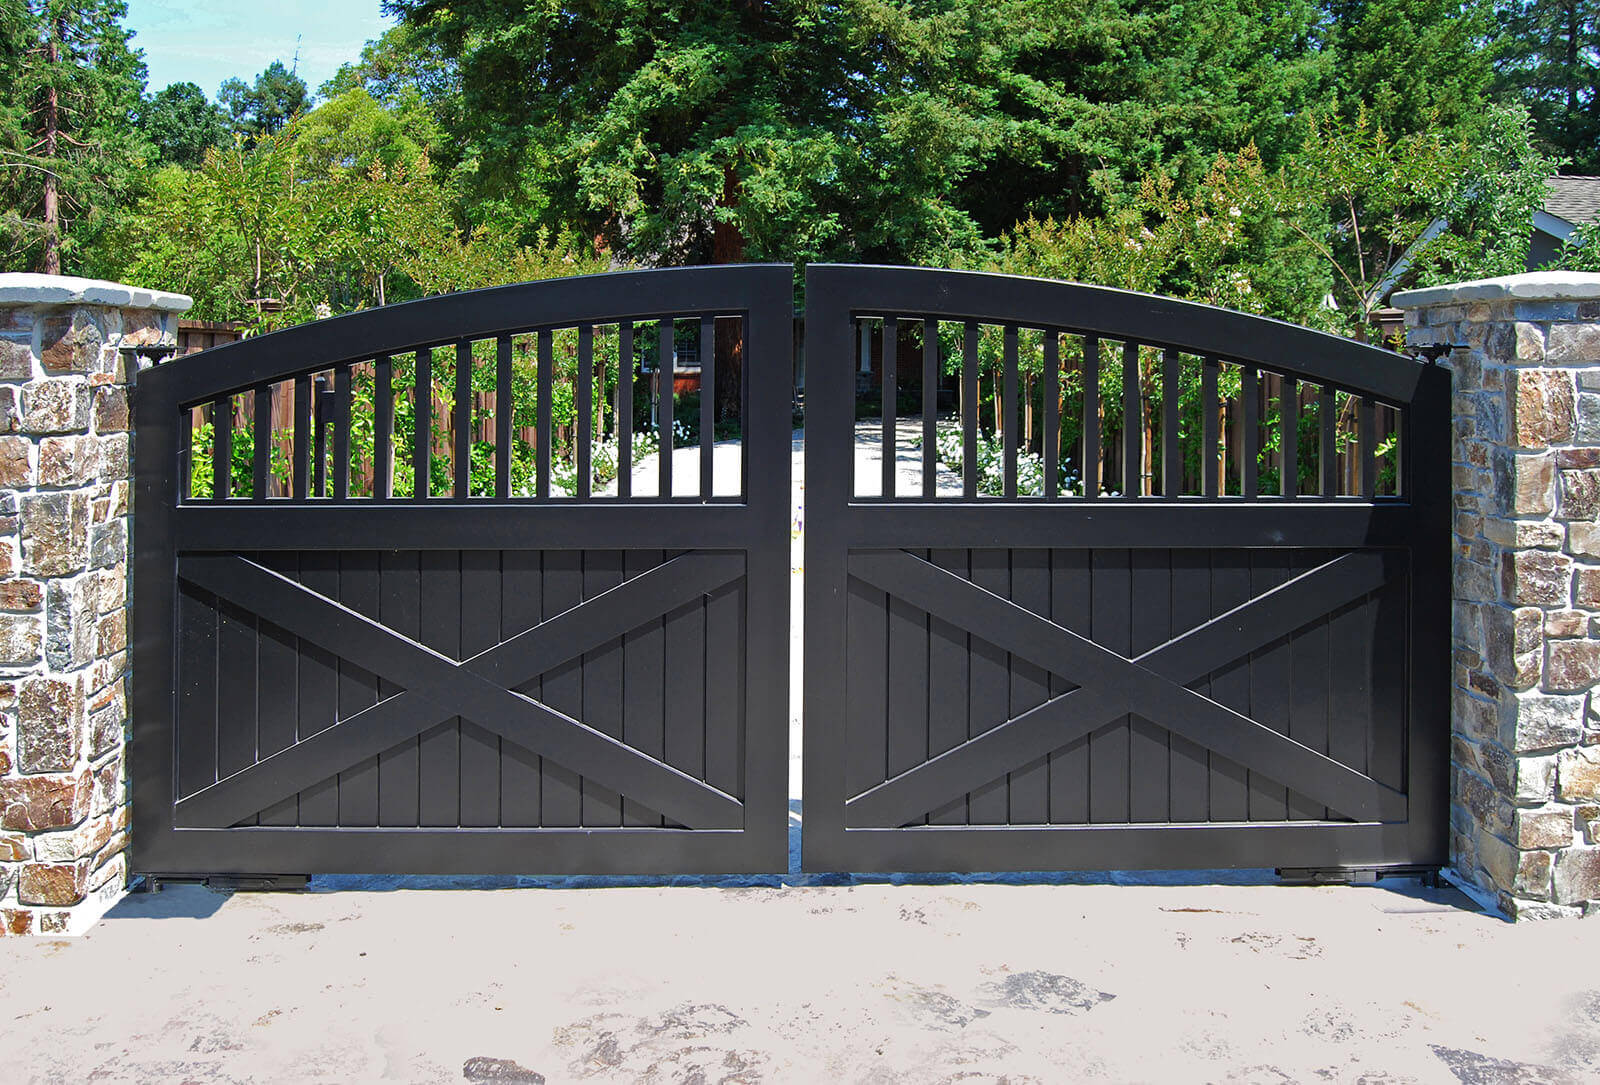 Stately black double gate with stone pillars opens onto a tree-lined drive